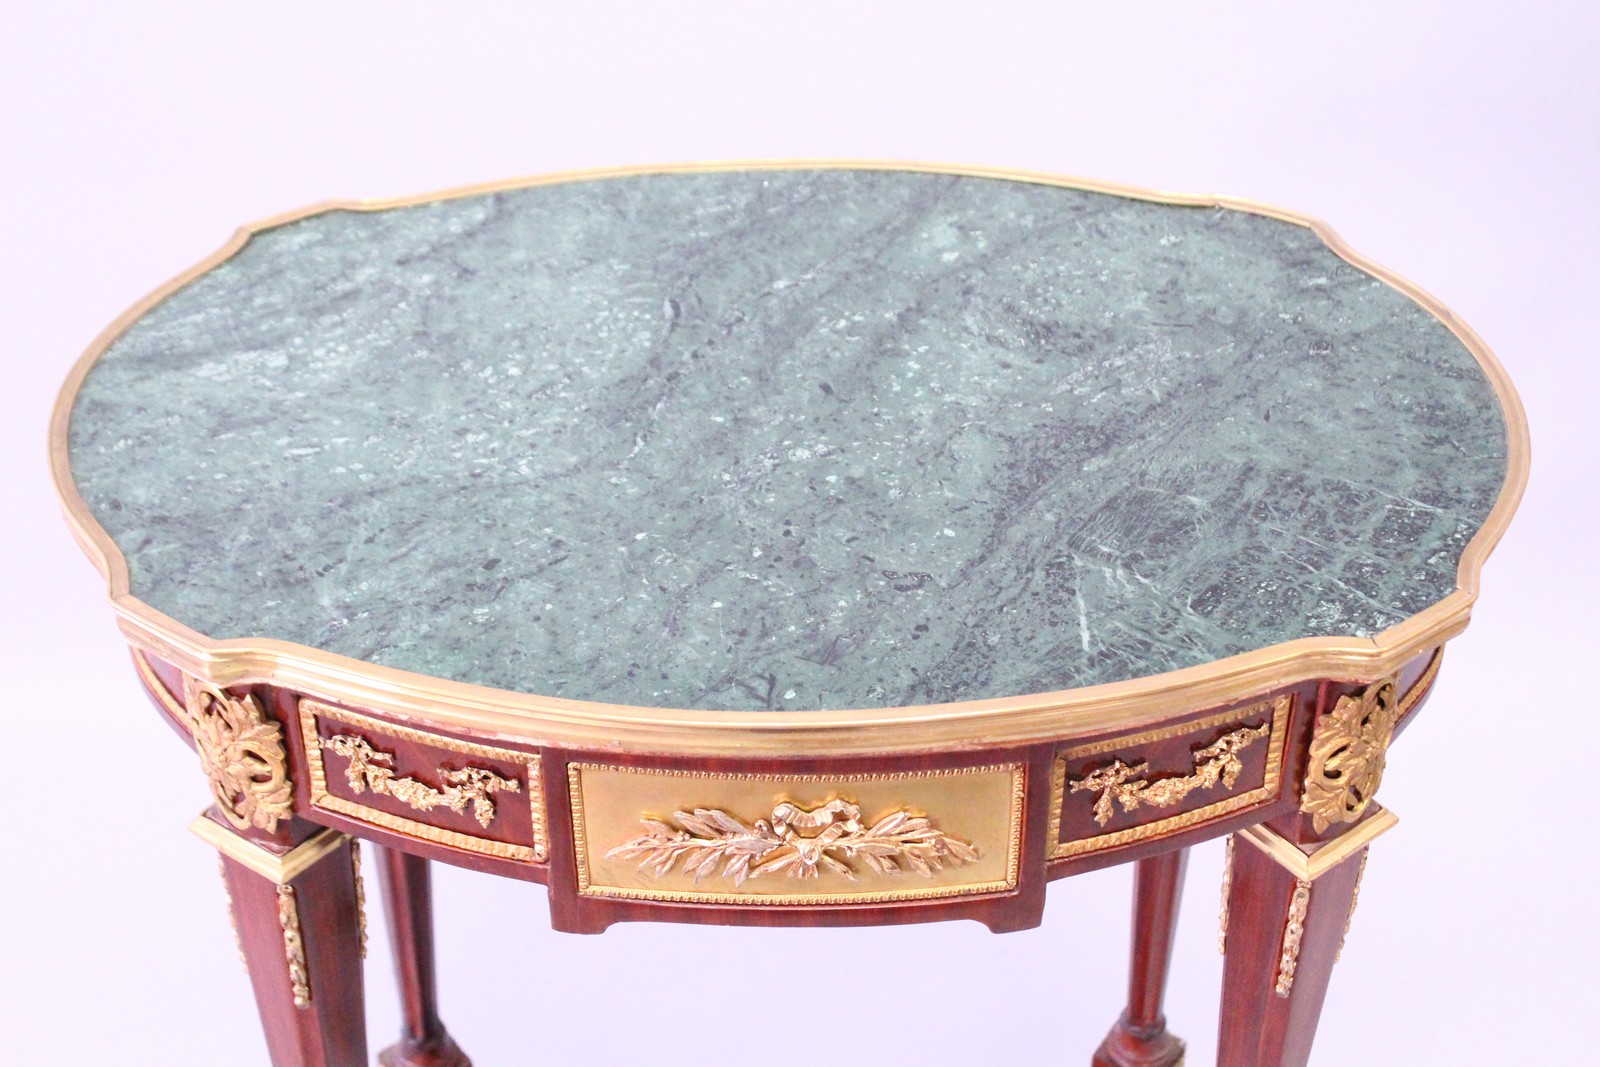 A GOOD LINKE MODEL SHAPED OVAL TABLE with inset marble top, ormolu mounts, tapering legs with - Image 2 of 2